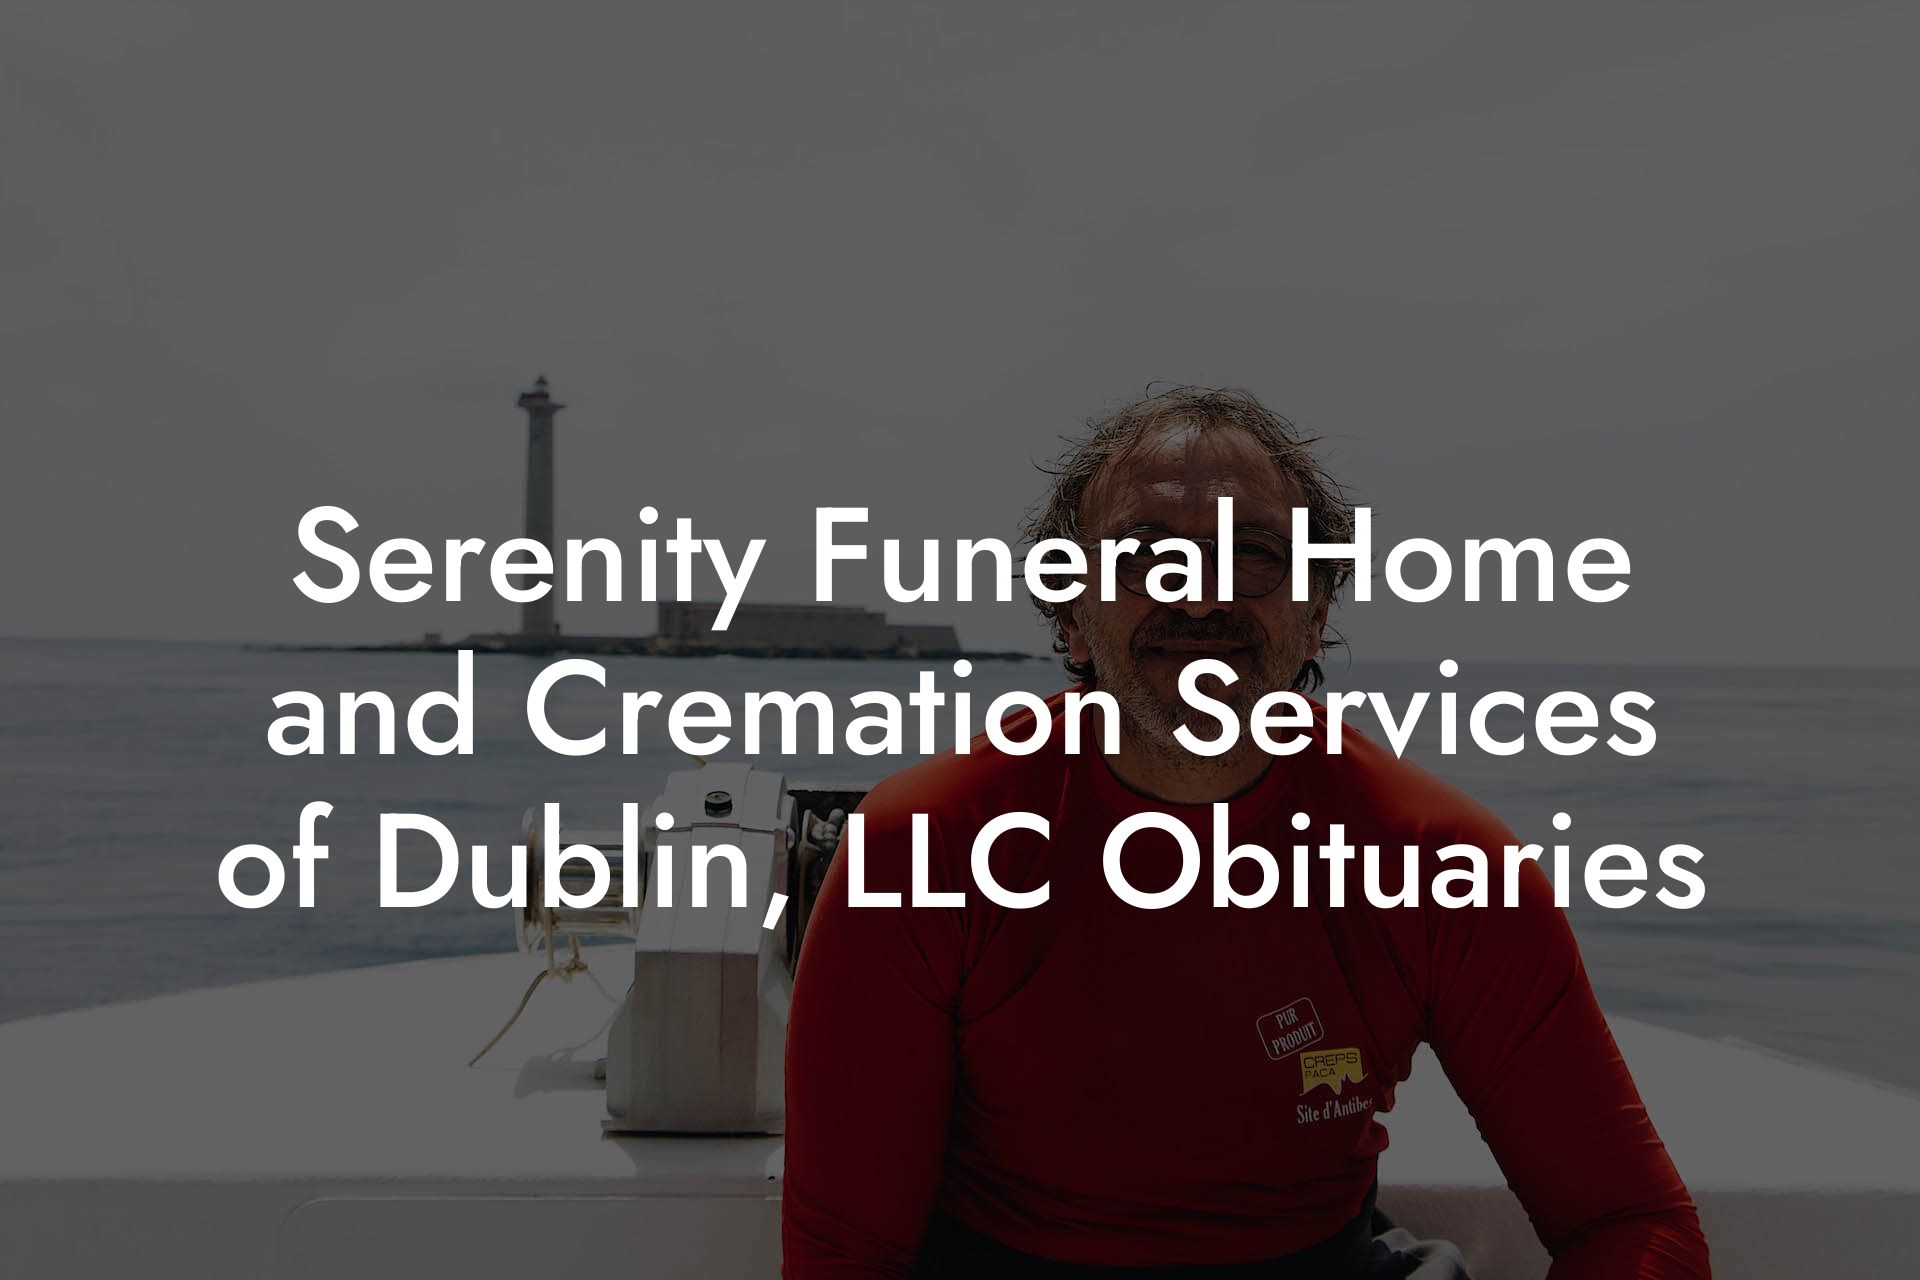 Serenity Funeral Home and Cremation Services of Dublin, LLC Obituaries